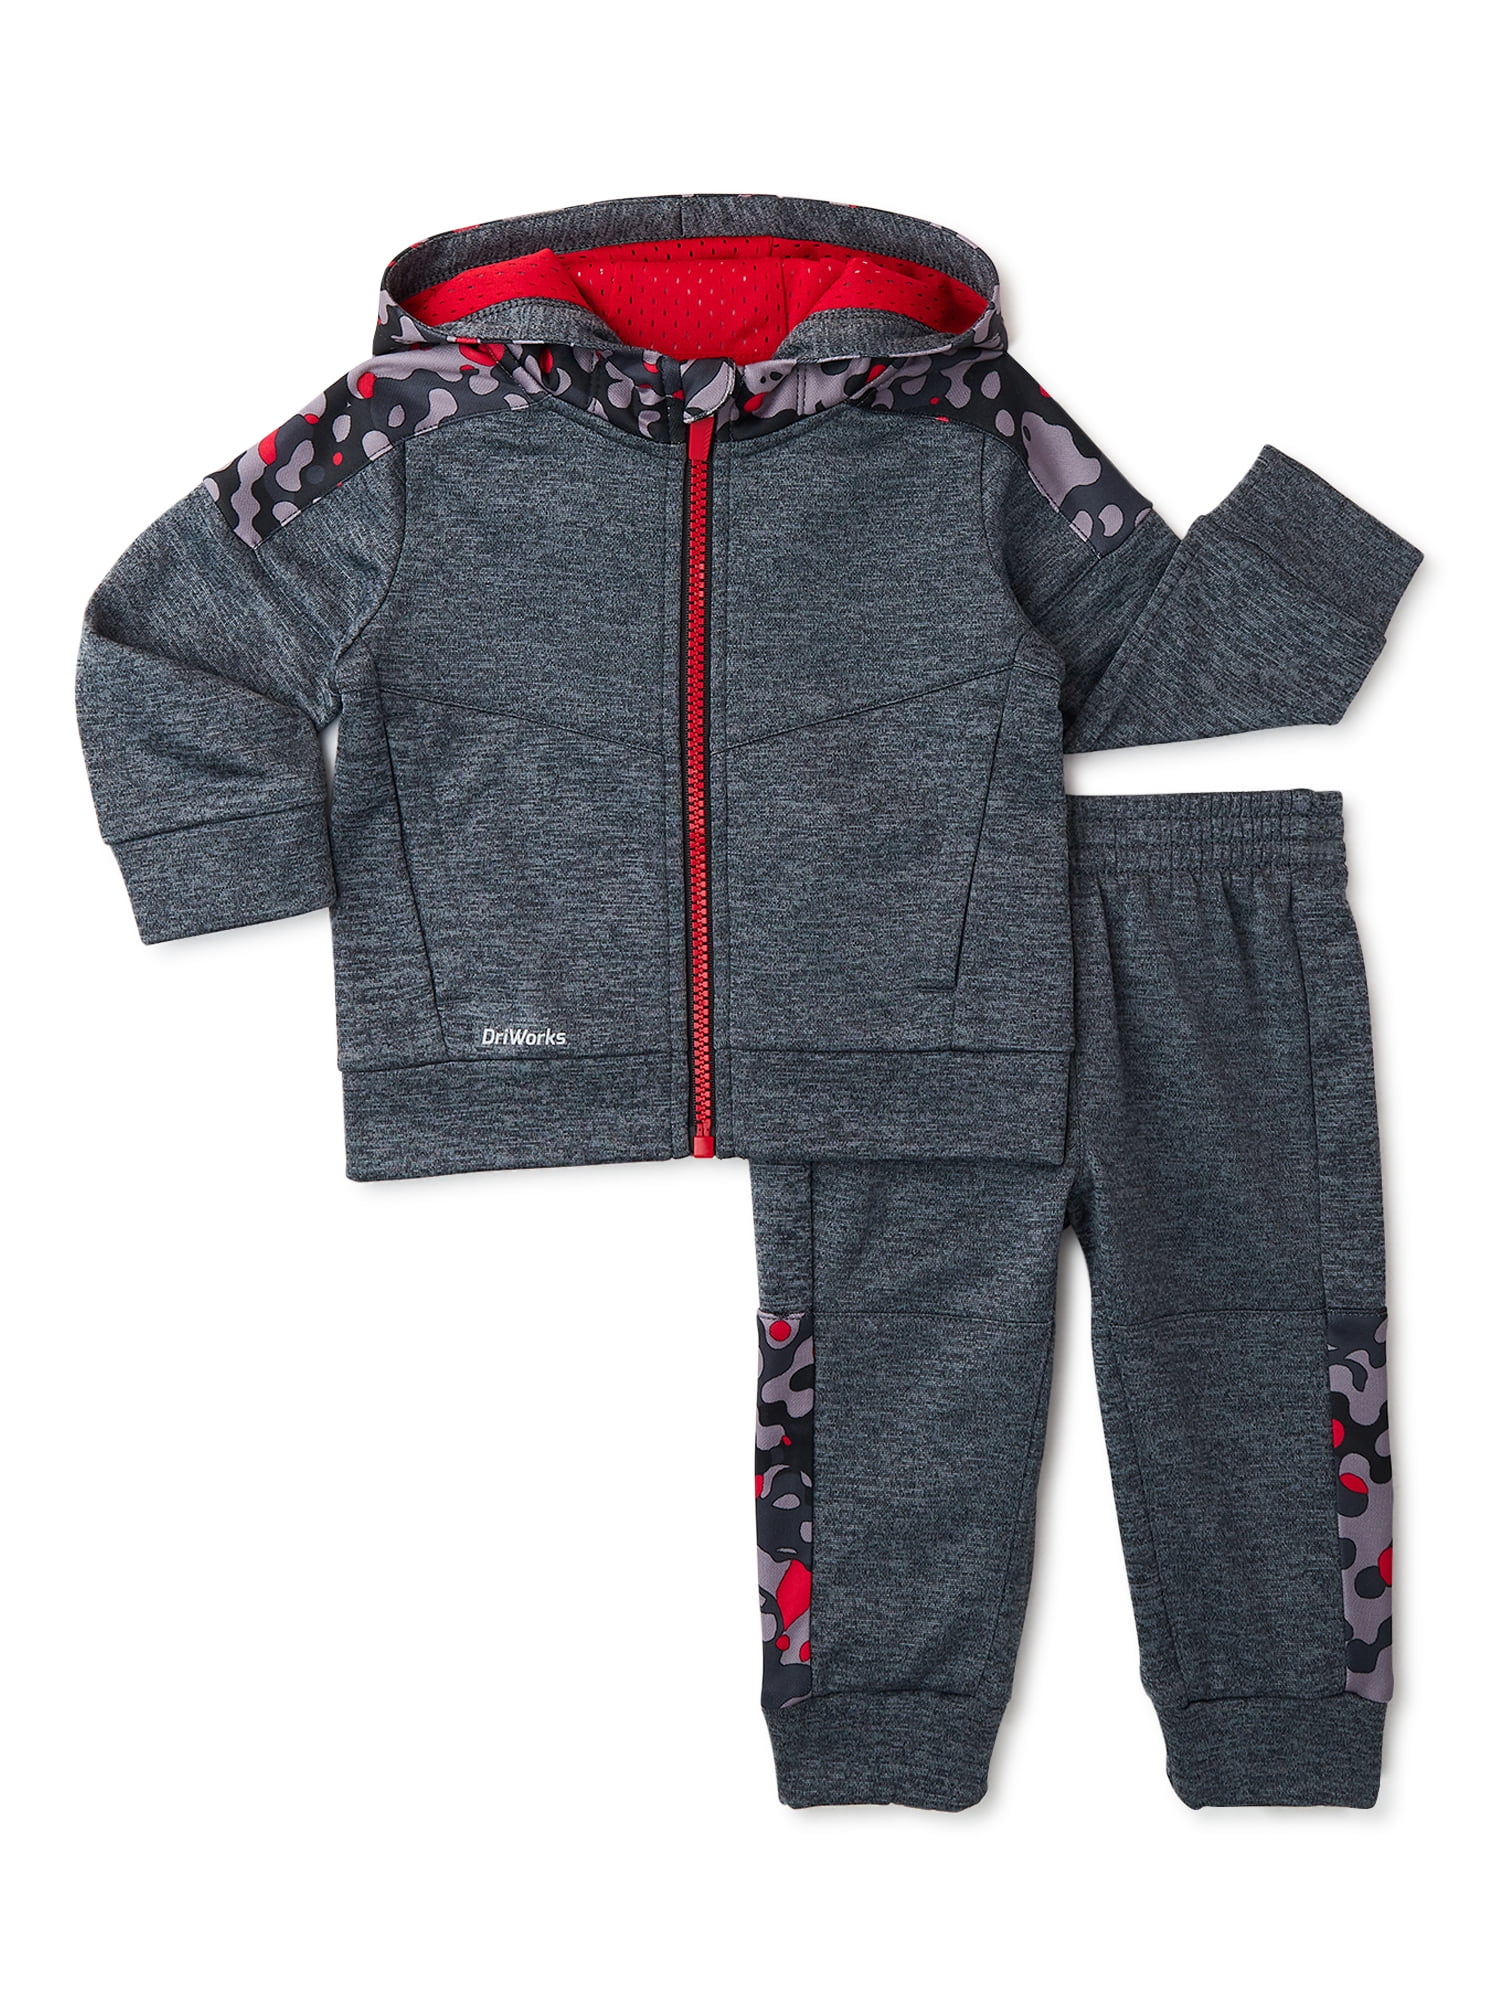 Athletic Works Baby Boys Tech Fleece Set Jacket and Pants, 2-Piece Outfit Set, Sizes 0/3-24 Months